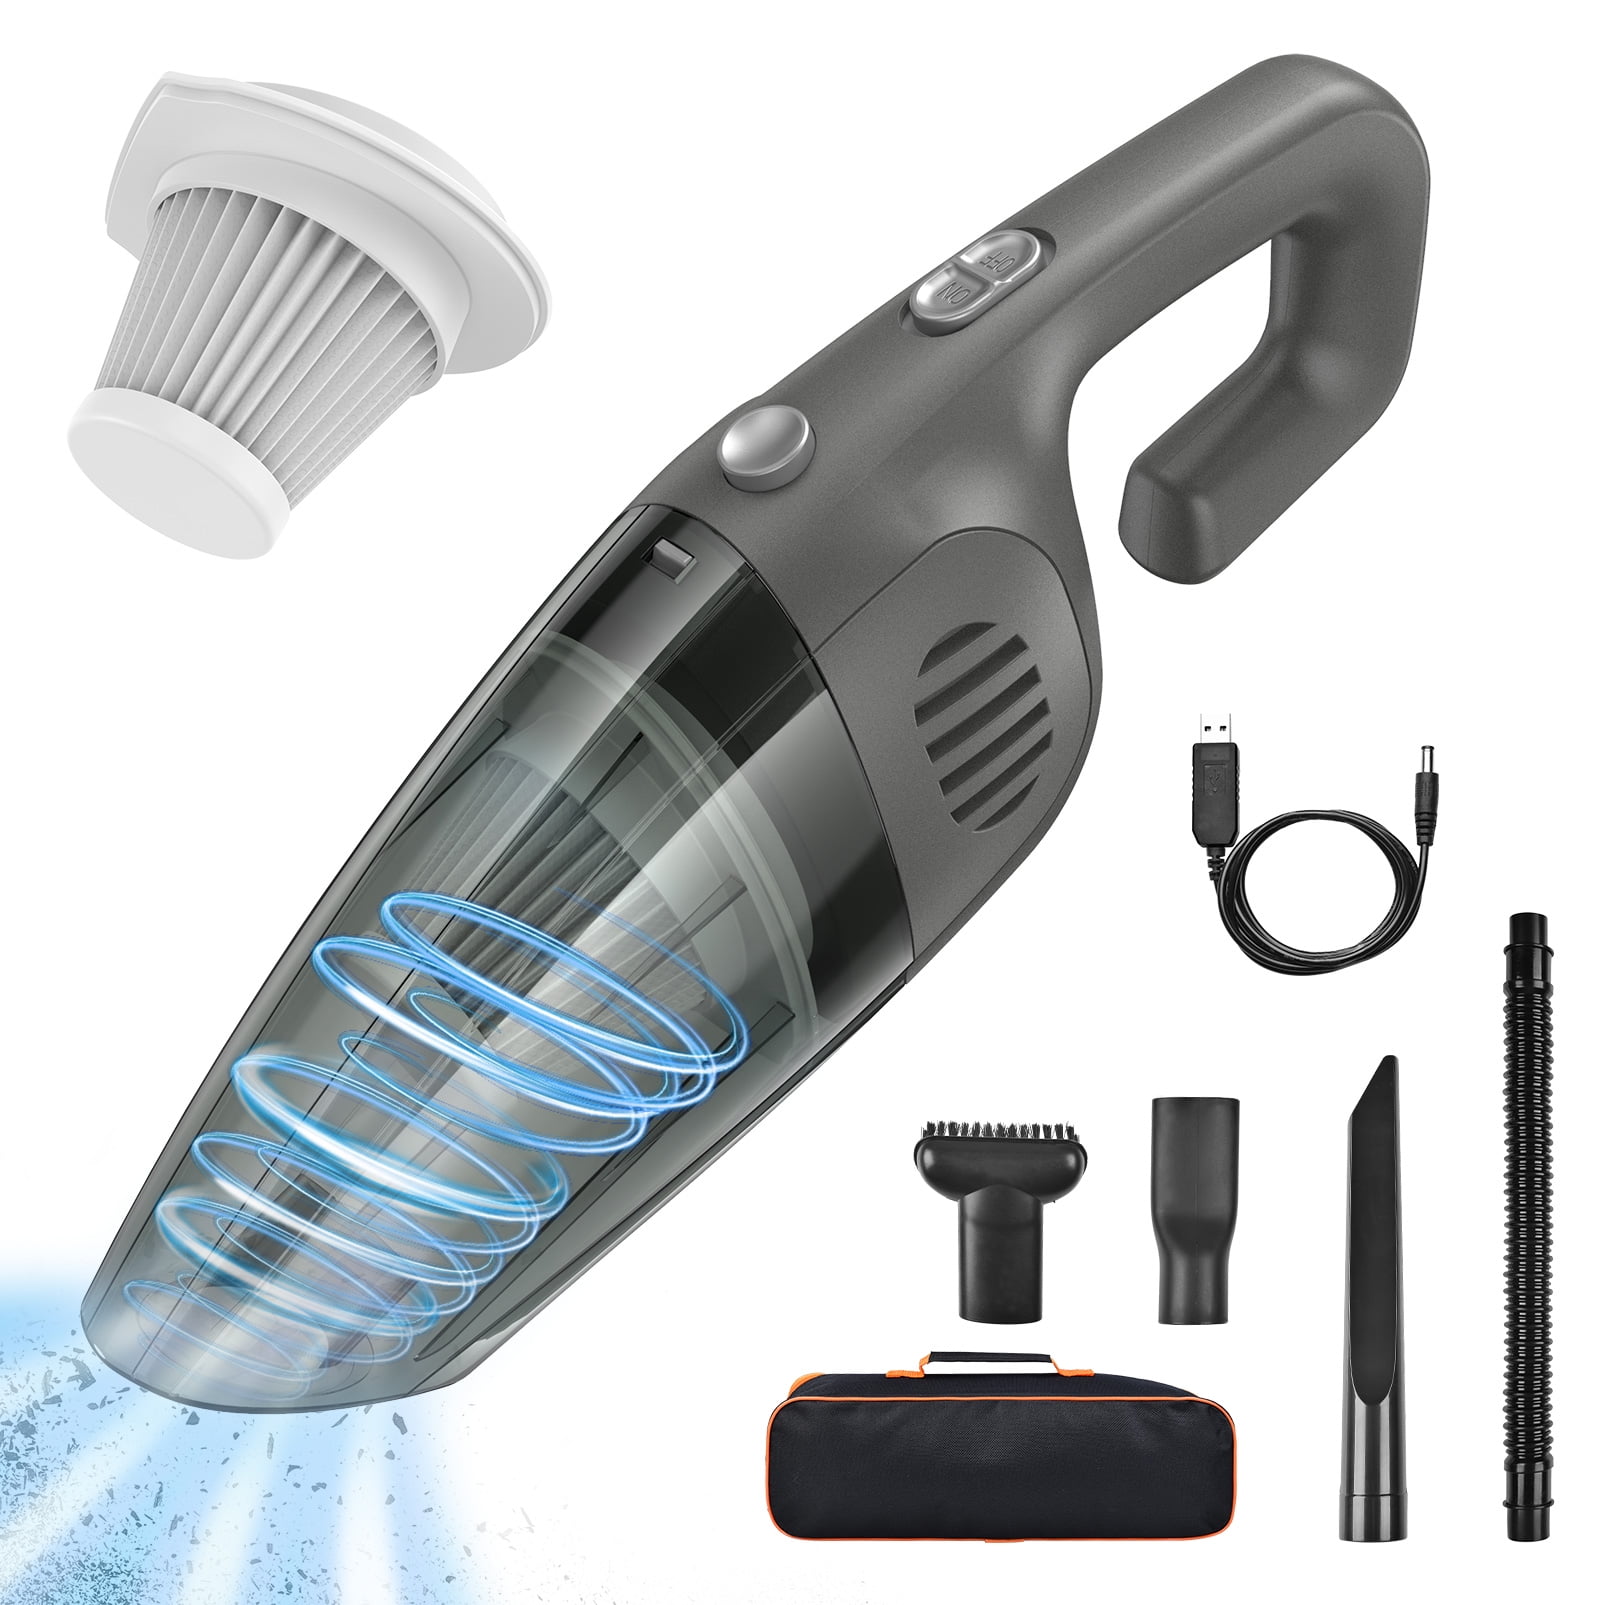 Cordless Handheld Home Car Vacuum Cleaner Rechargeable Portable Wet Dry Clear 